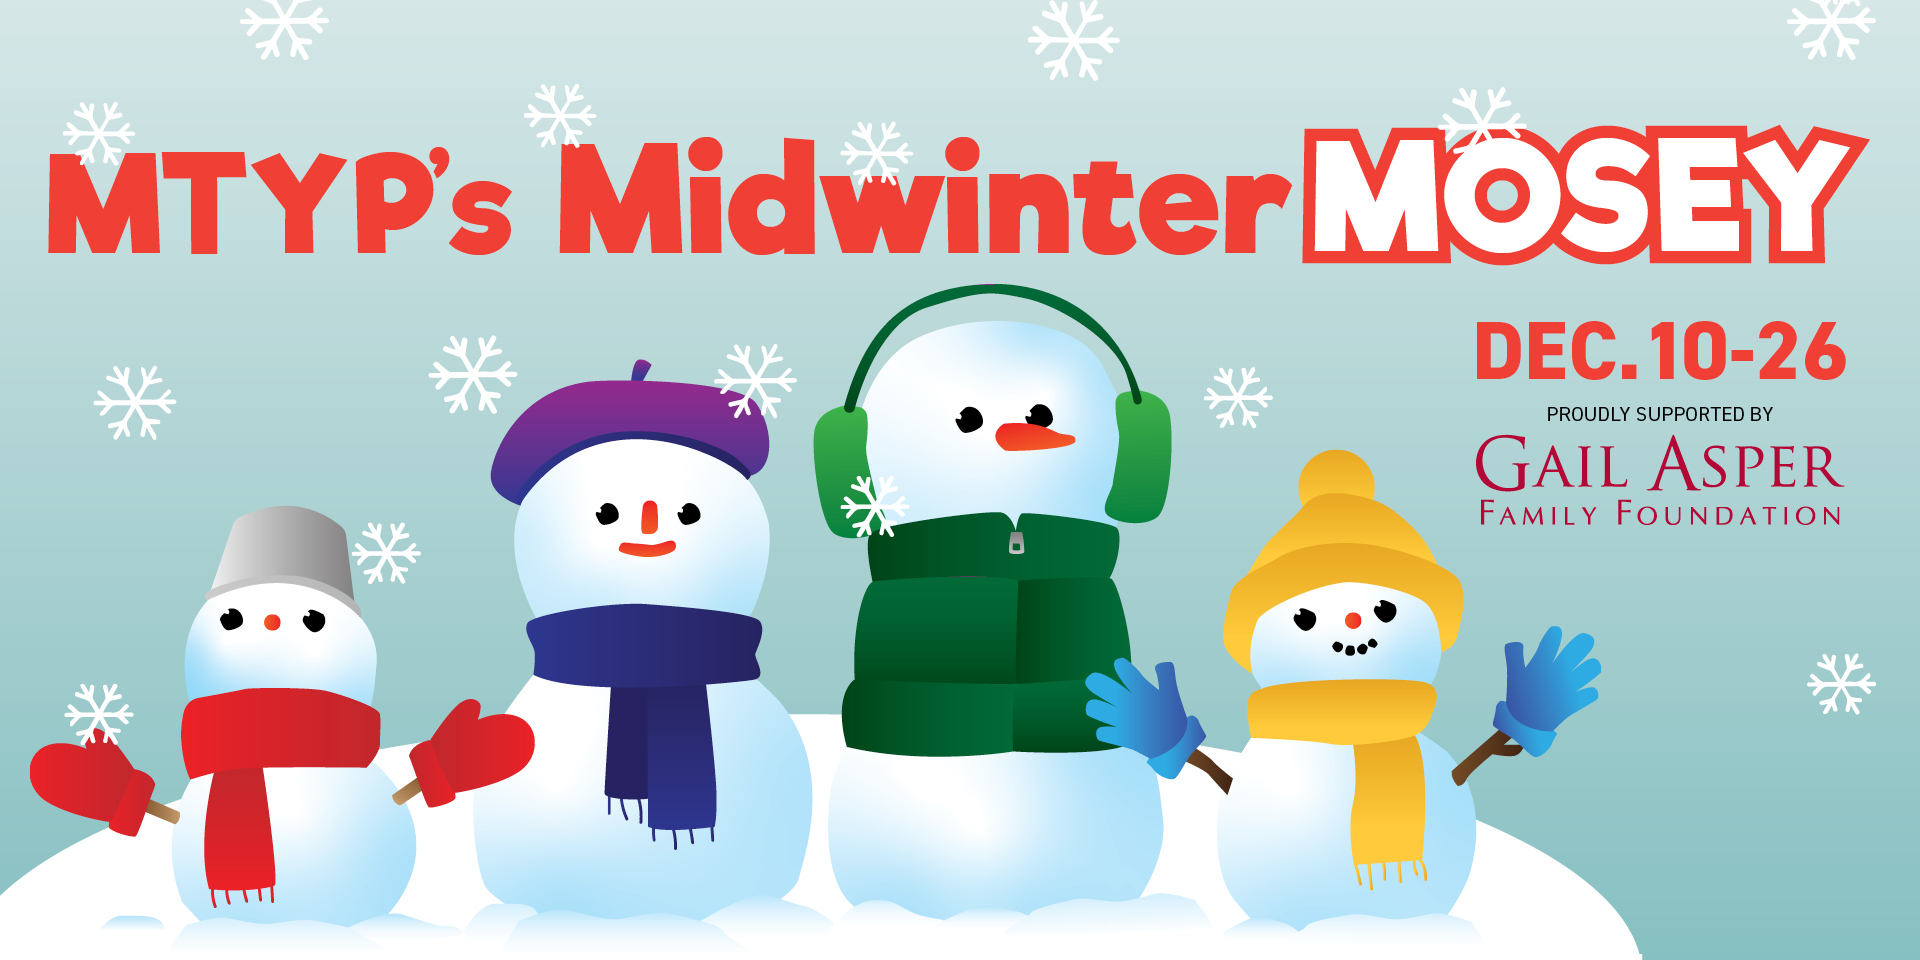 MTYP’s Midwinter Mosey